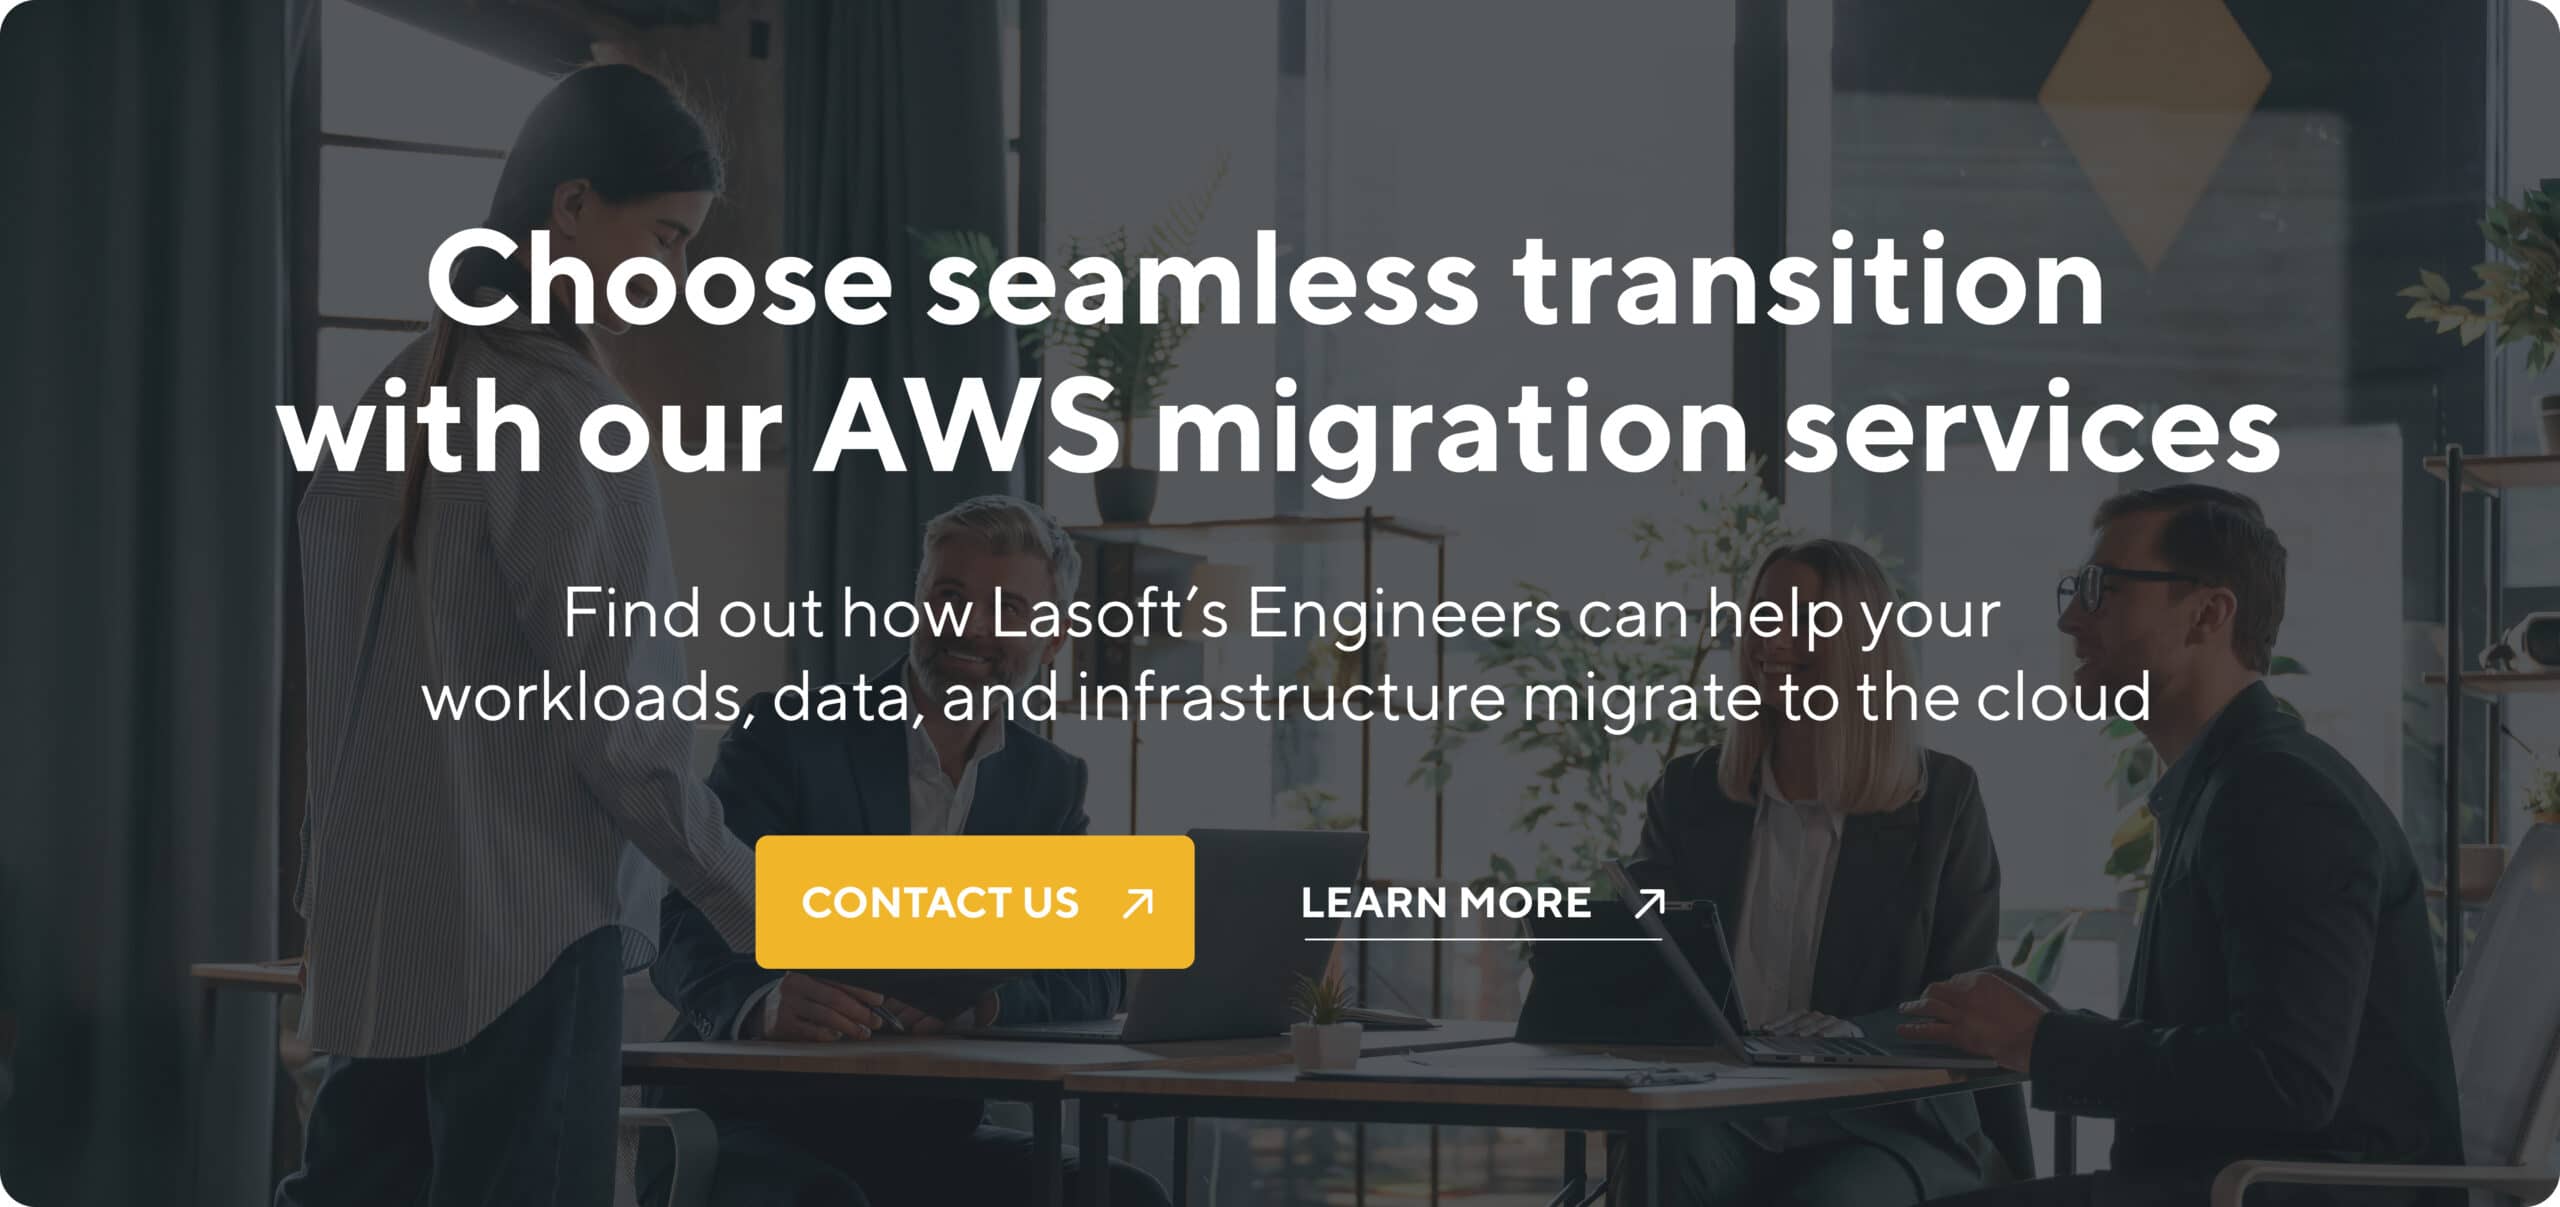 AWS Migration services by LaSoft